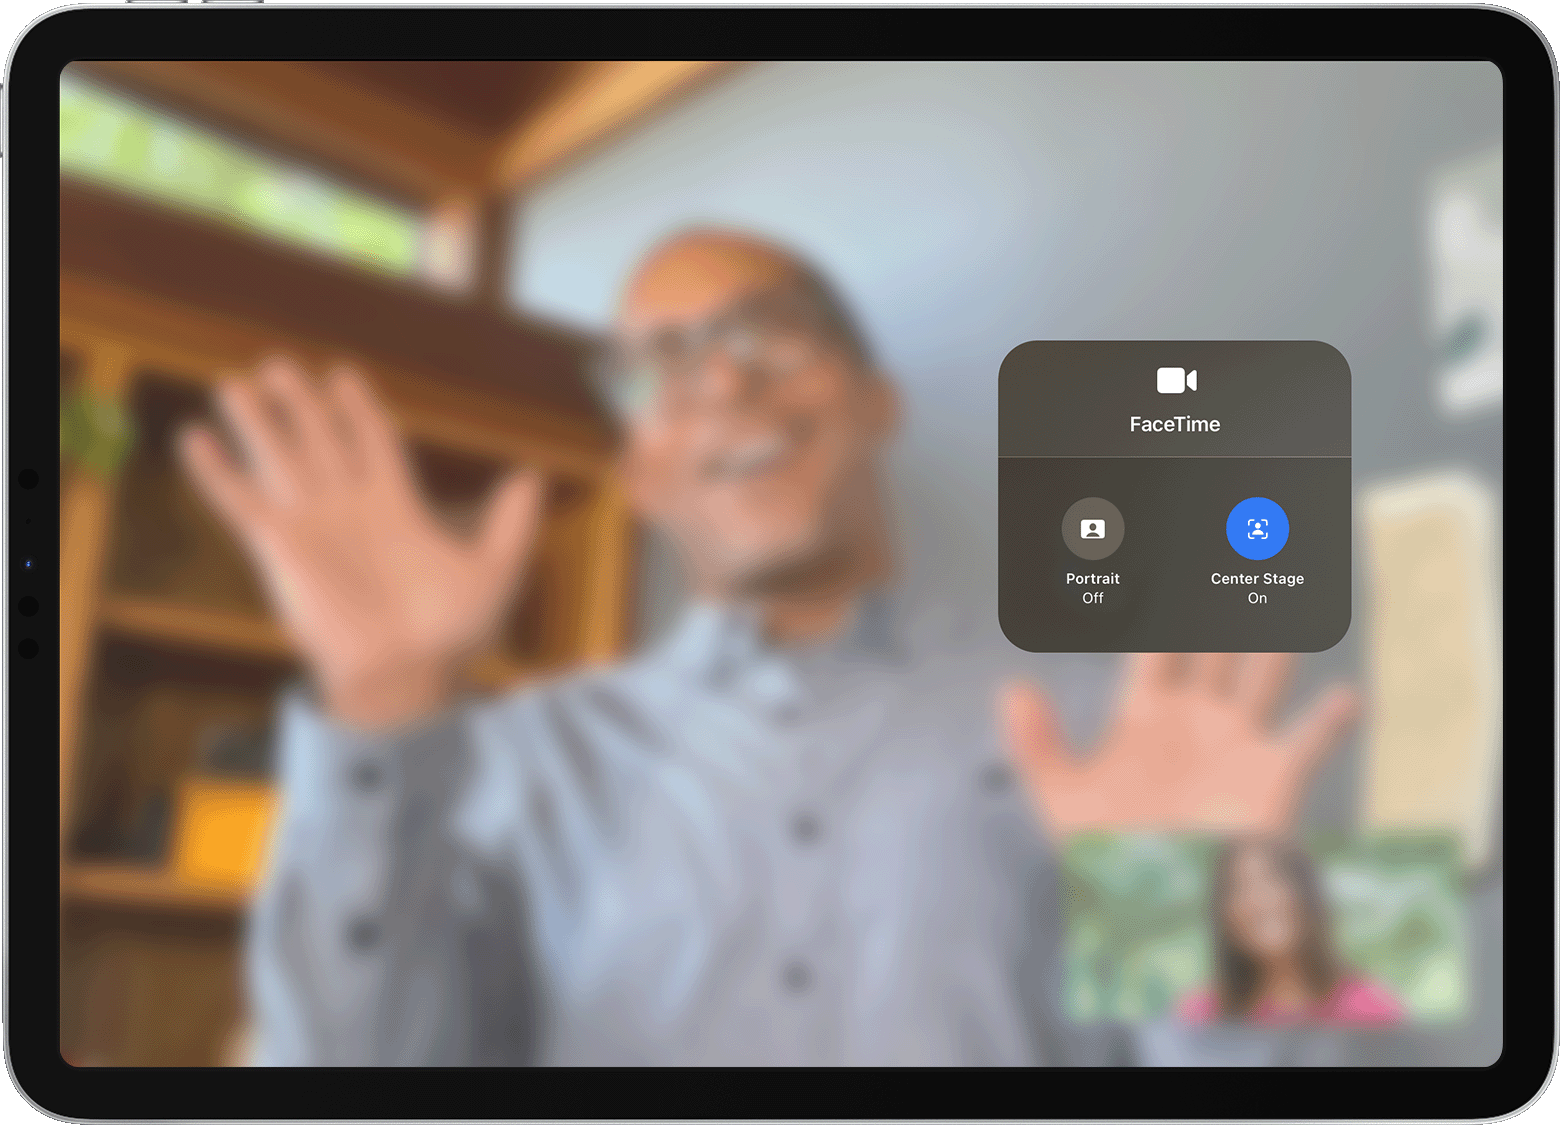 iPad screen showing a FaceTime call with the Video Effects options visible